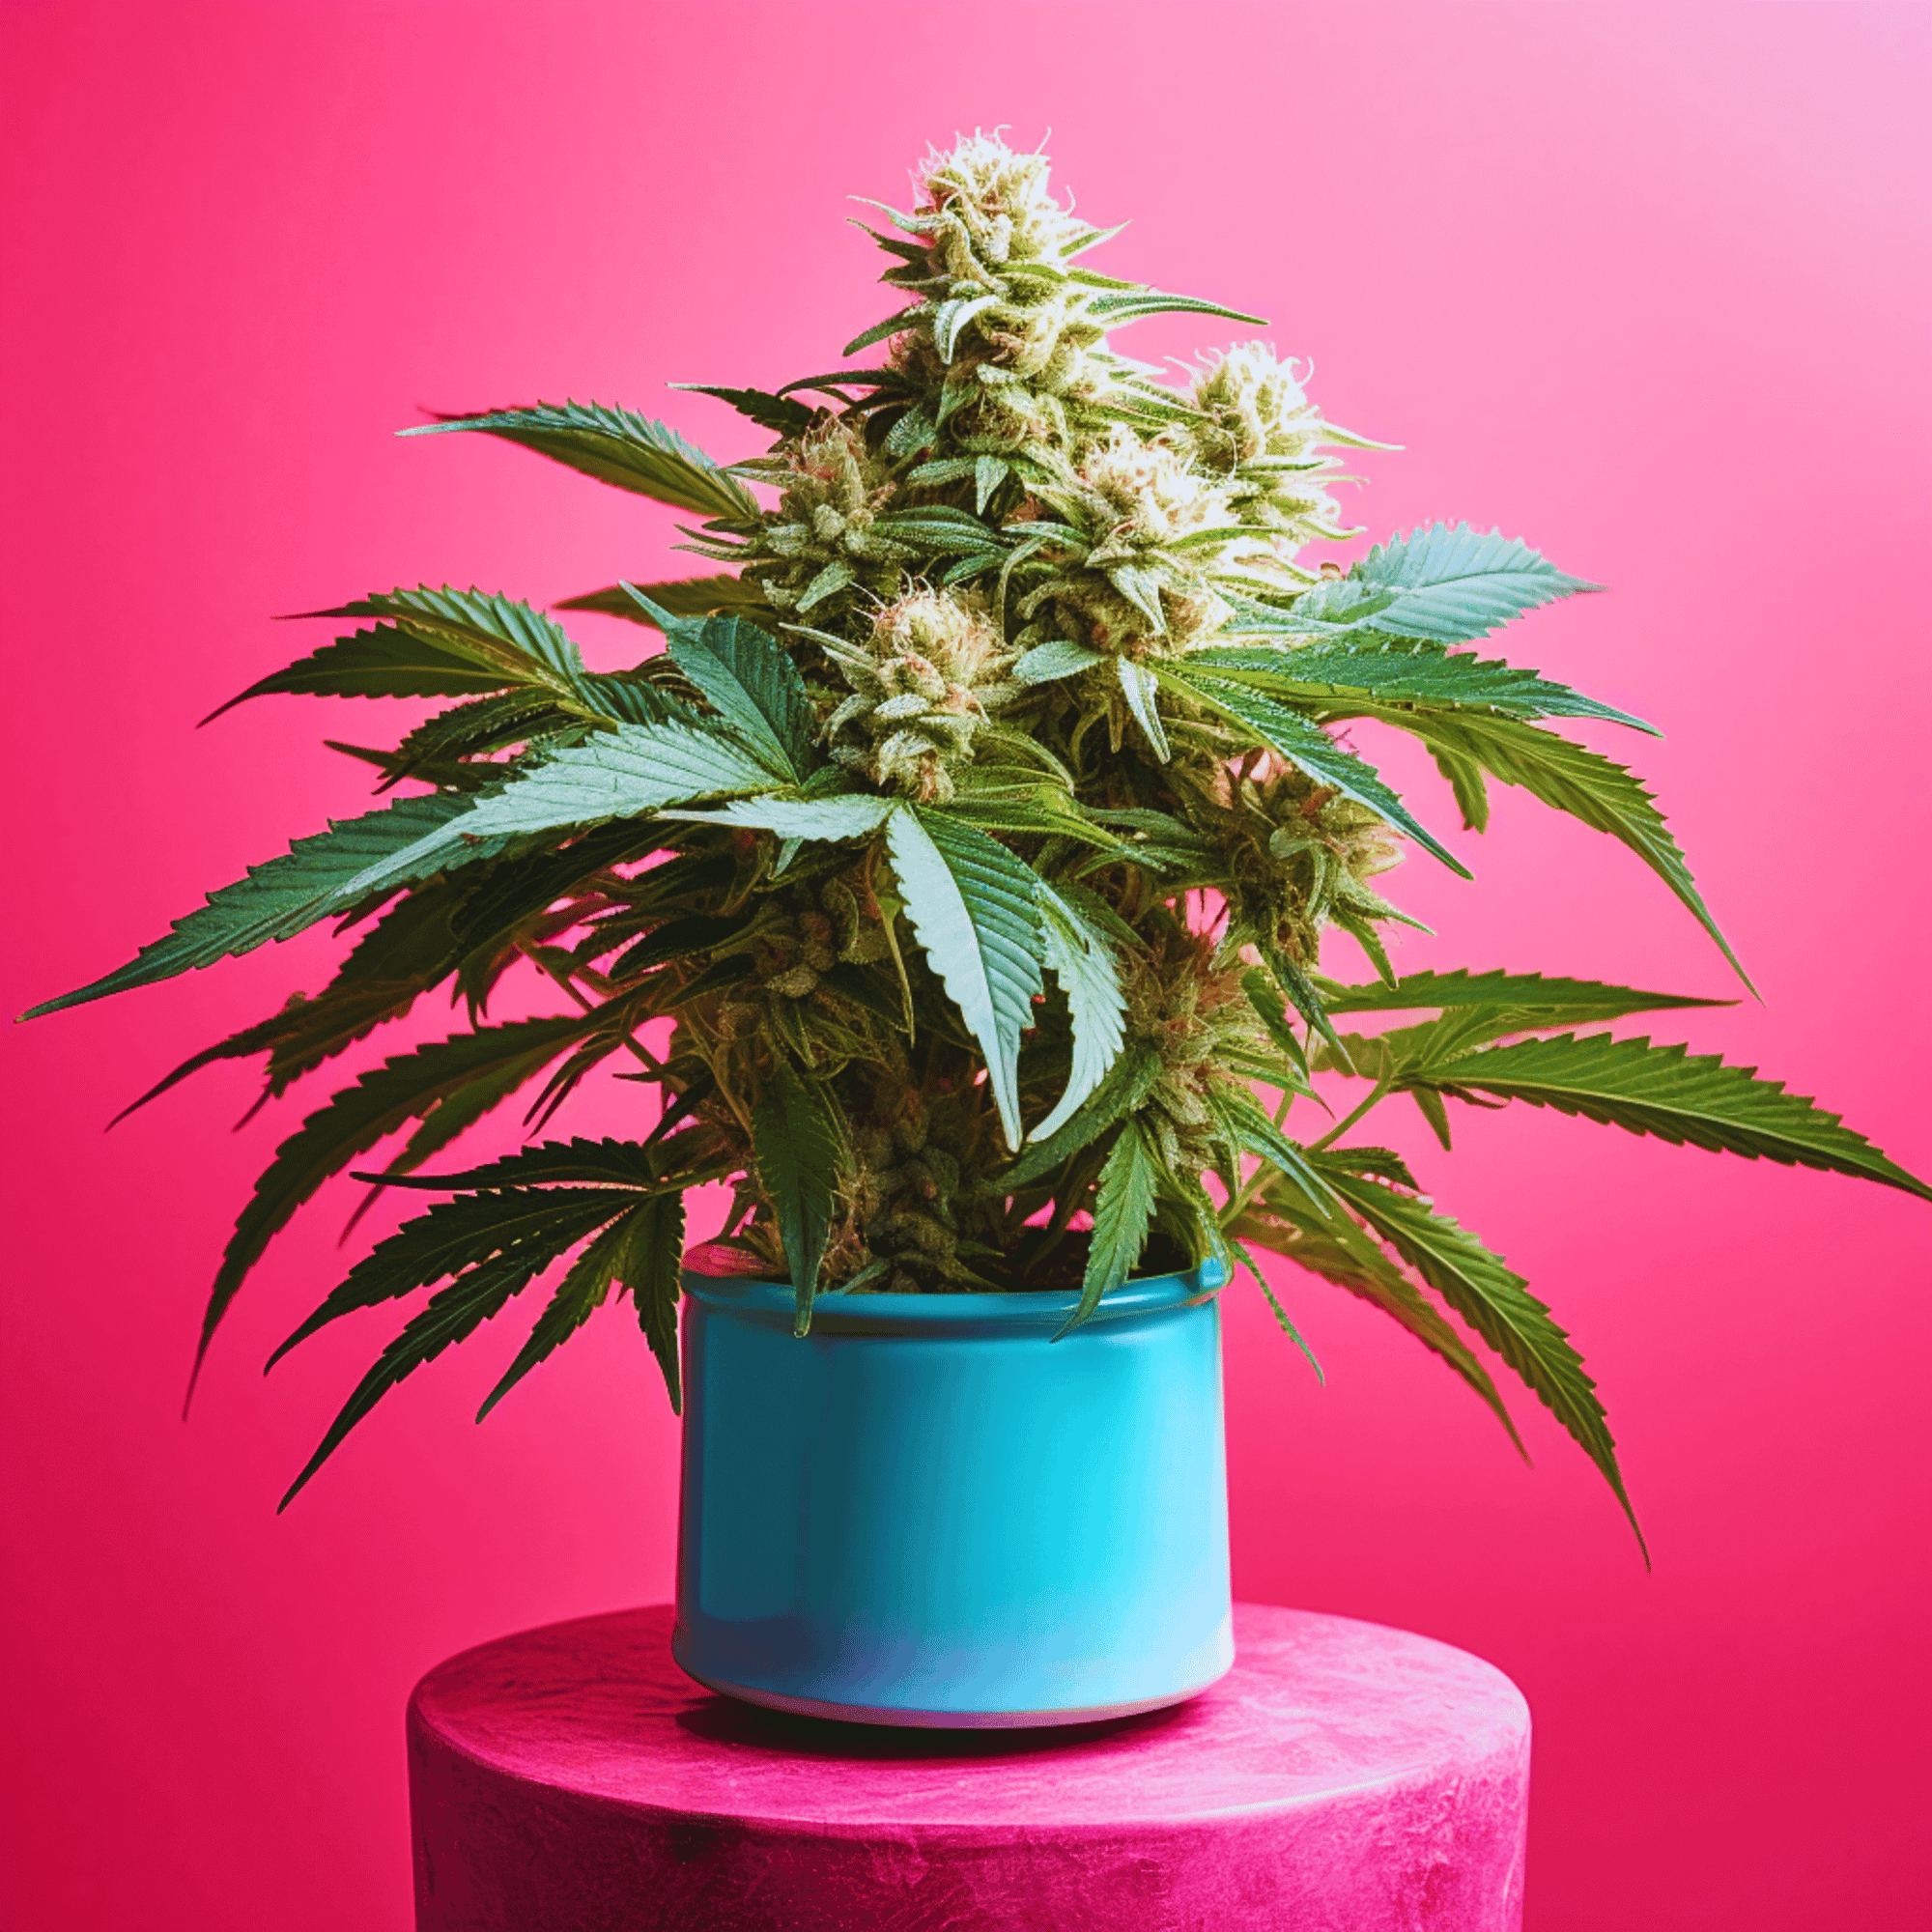 Hybrid Cannabis Plant Flowering In A Pot